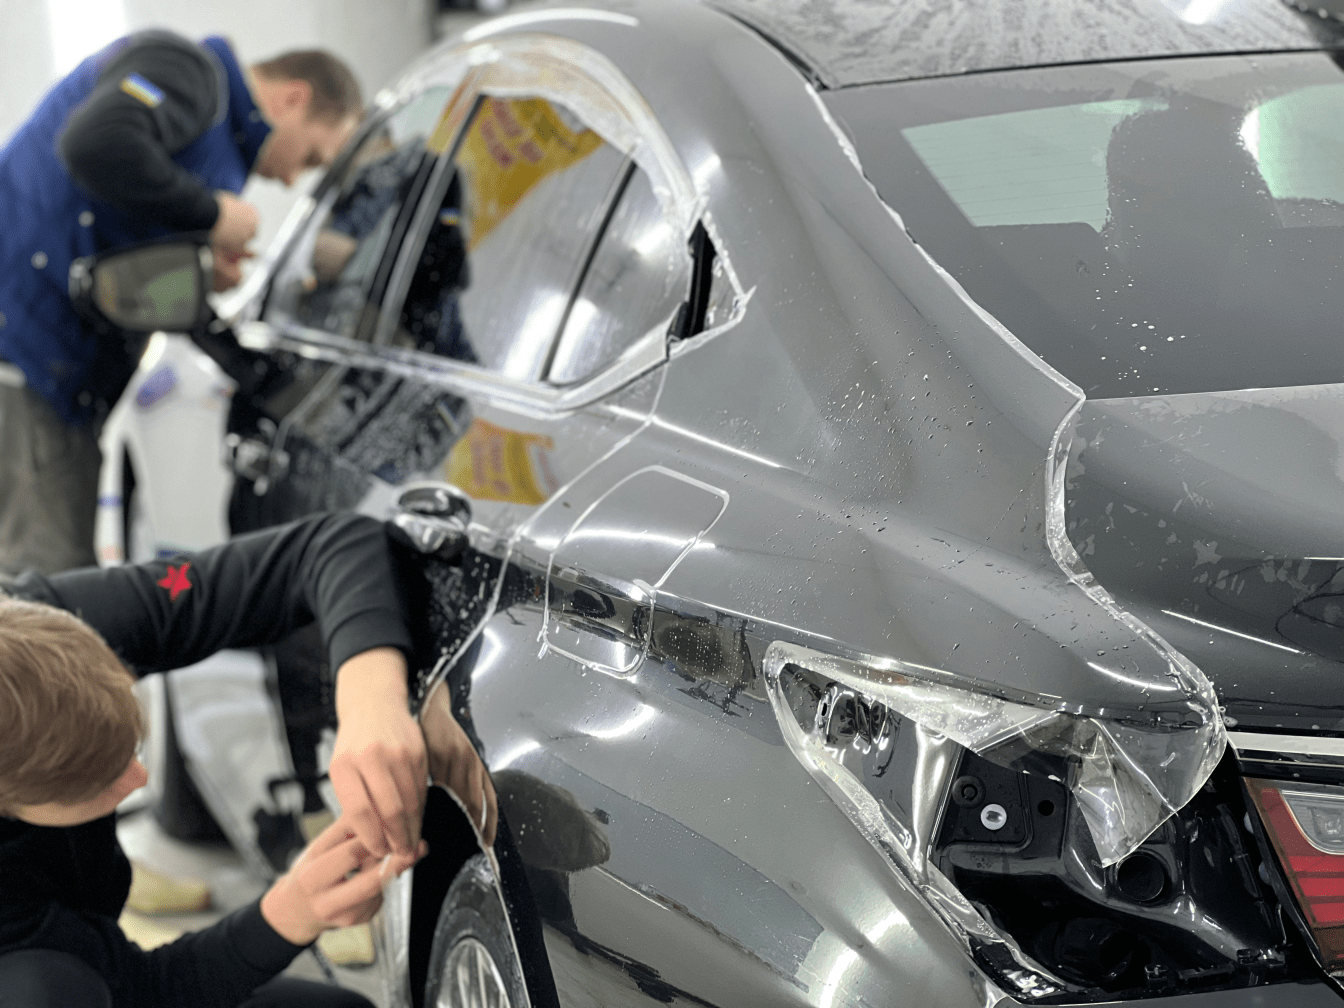 Wrapping a car with a protective film